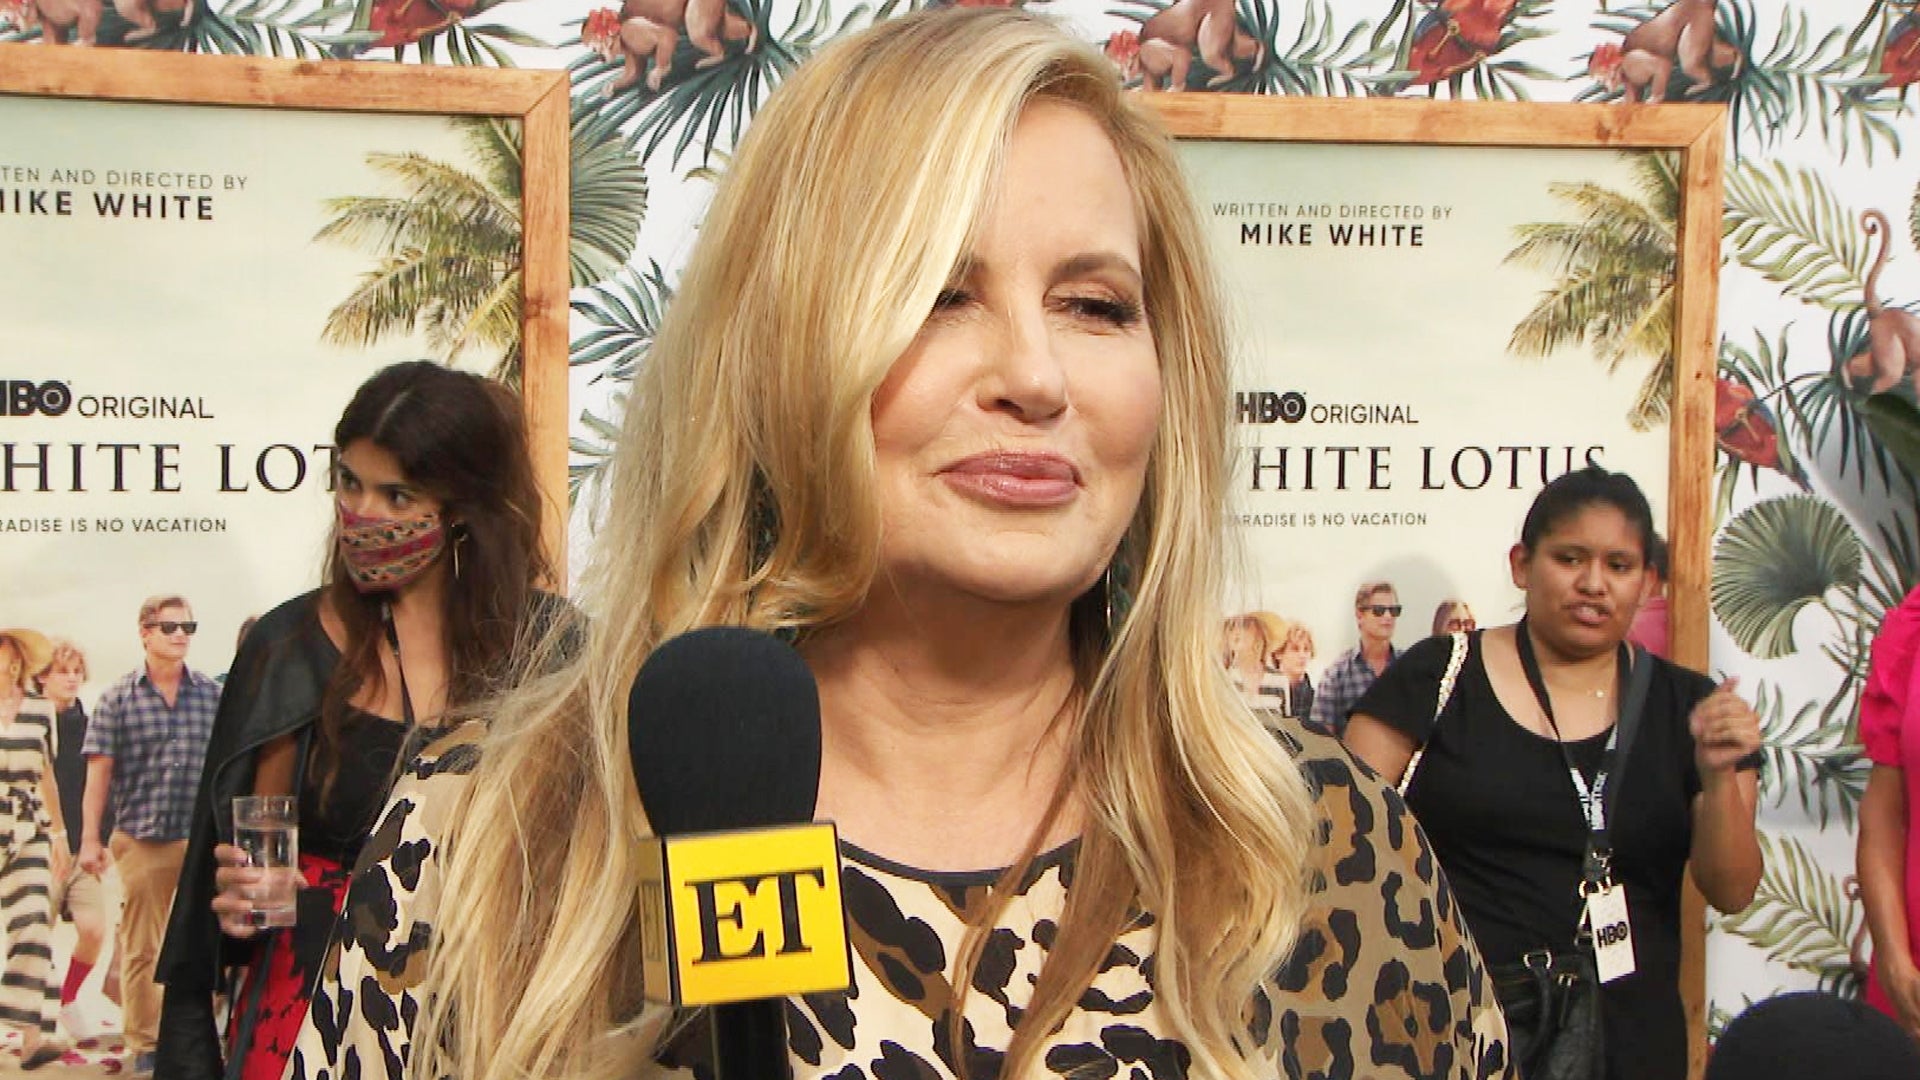 The White Lotus': Jennifer Coolidge's Funniest Moments, From 'Littering'  Ashes to That 'BLM' Misunderstanding - TheWrap